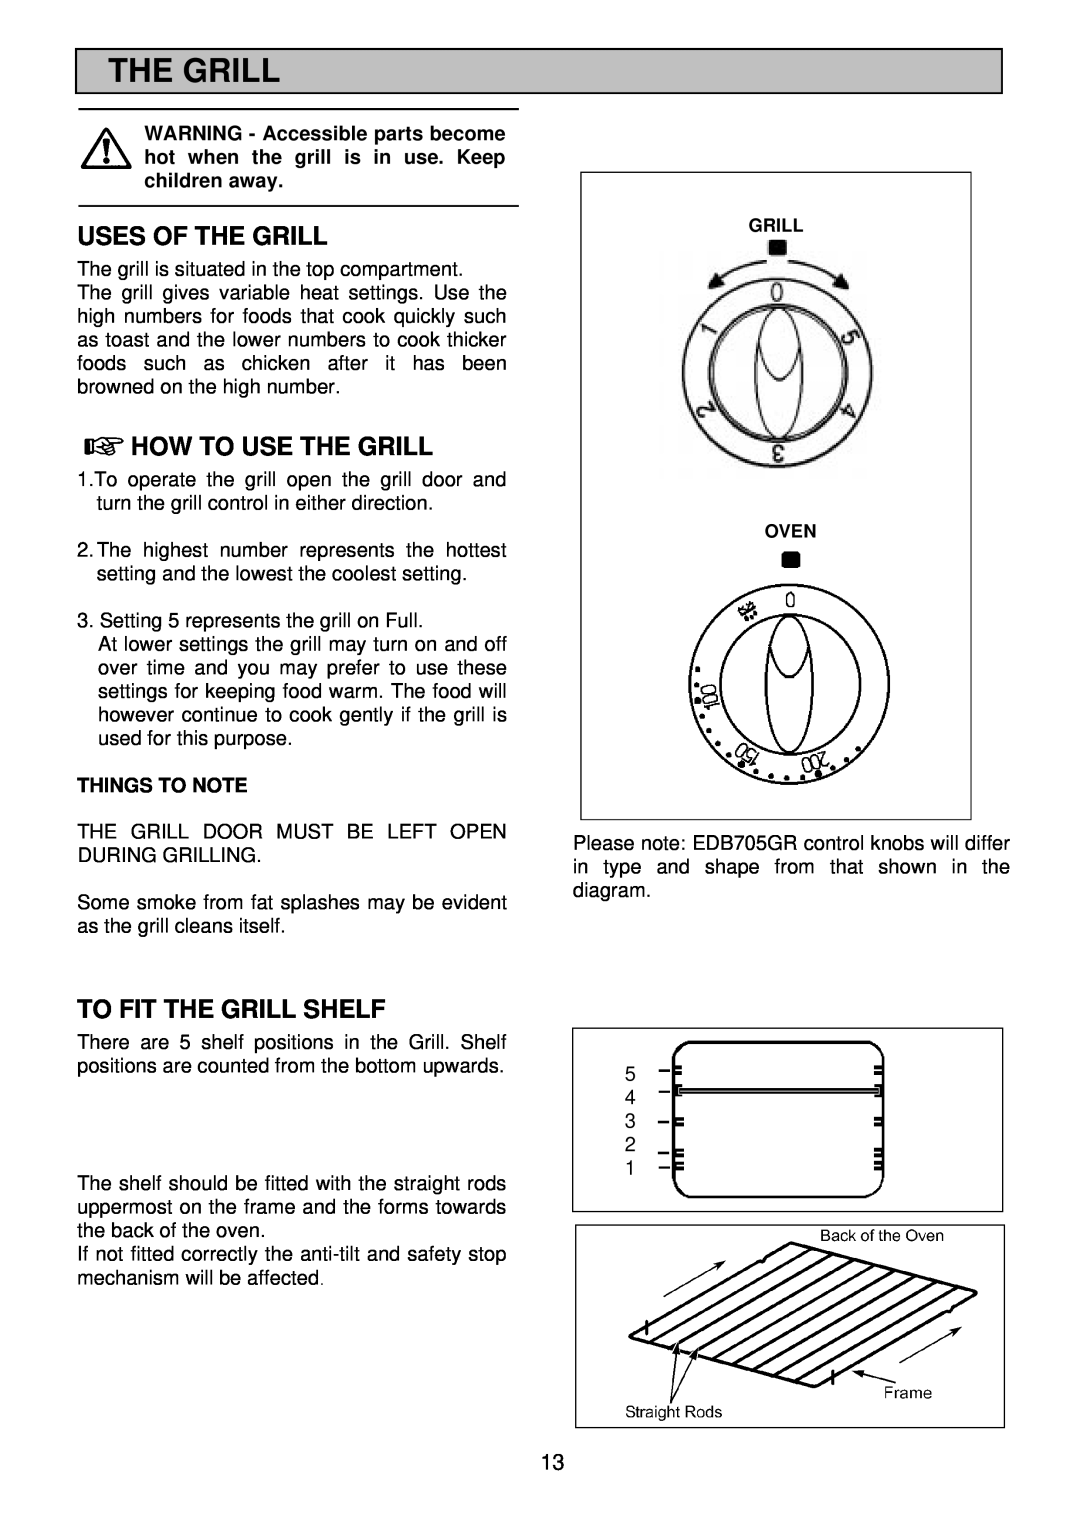 Electrolux EDB705 manual Uses Of The Grill, How To Use The Grill, To Fit The Grill Shelf, Things To Note 